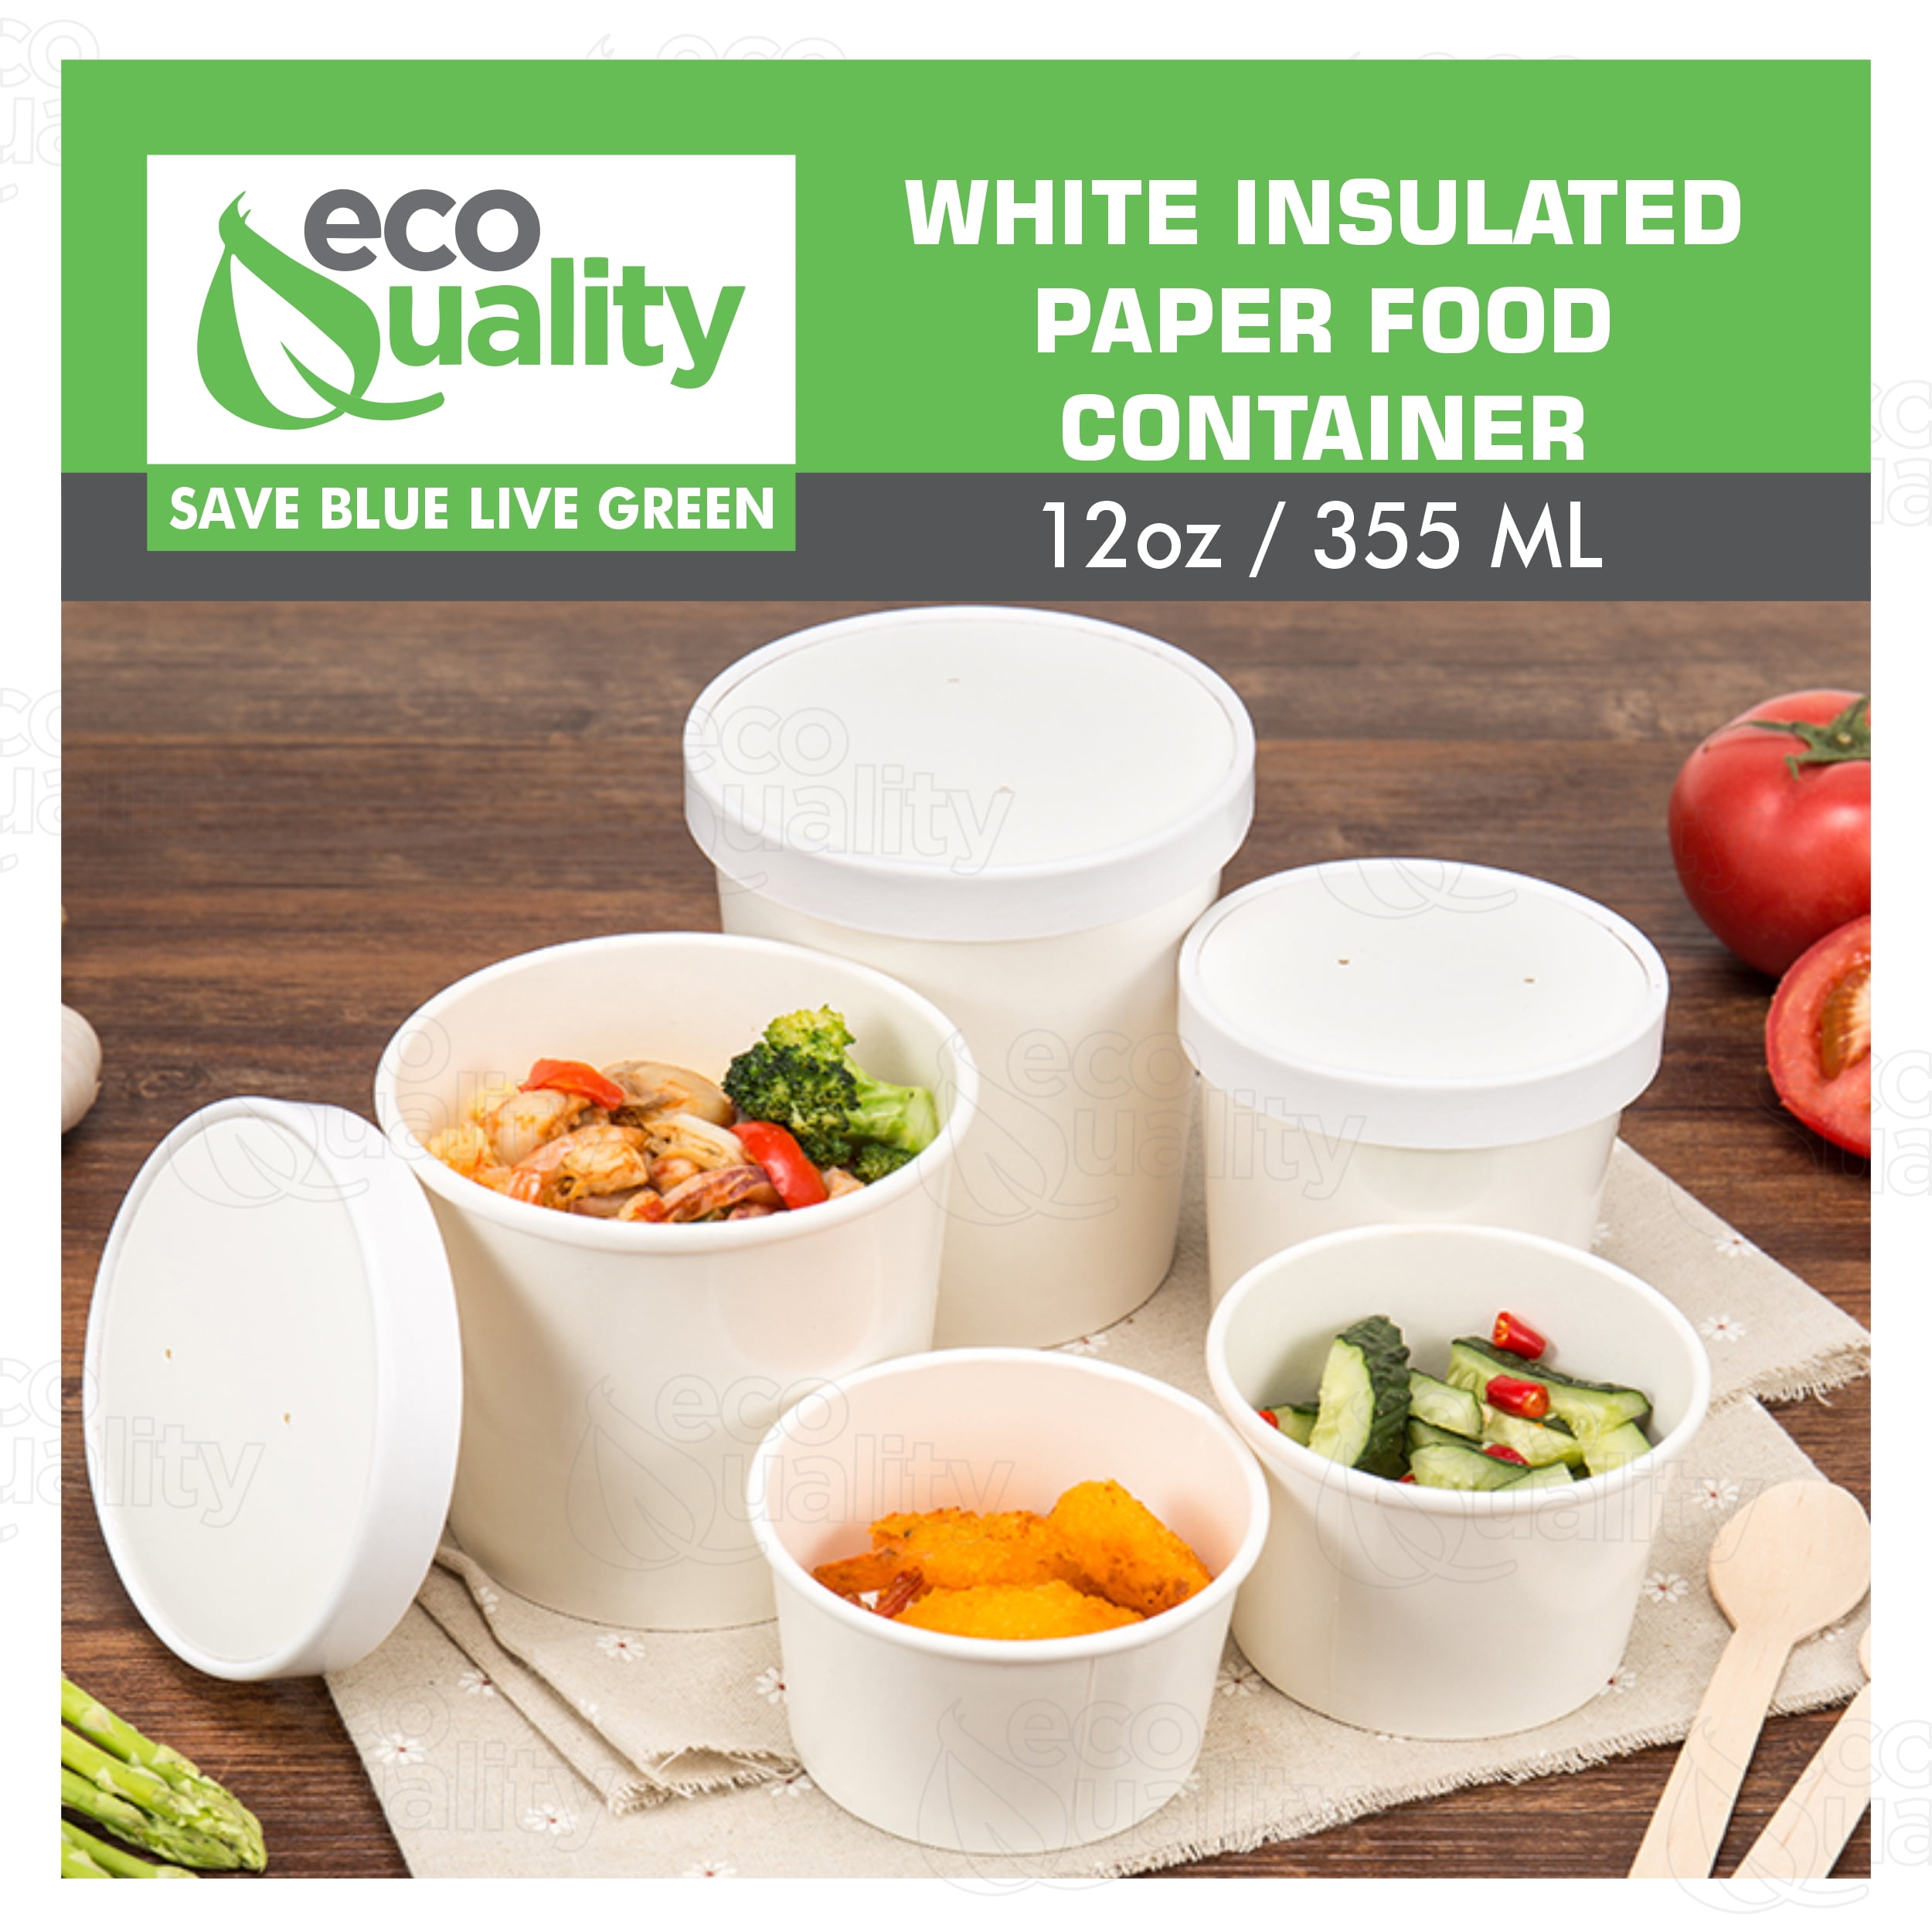 GET EC-07 12 oz. Clear Customizable Reusable Eco-Takeouts Soup Container -  12/Pack